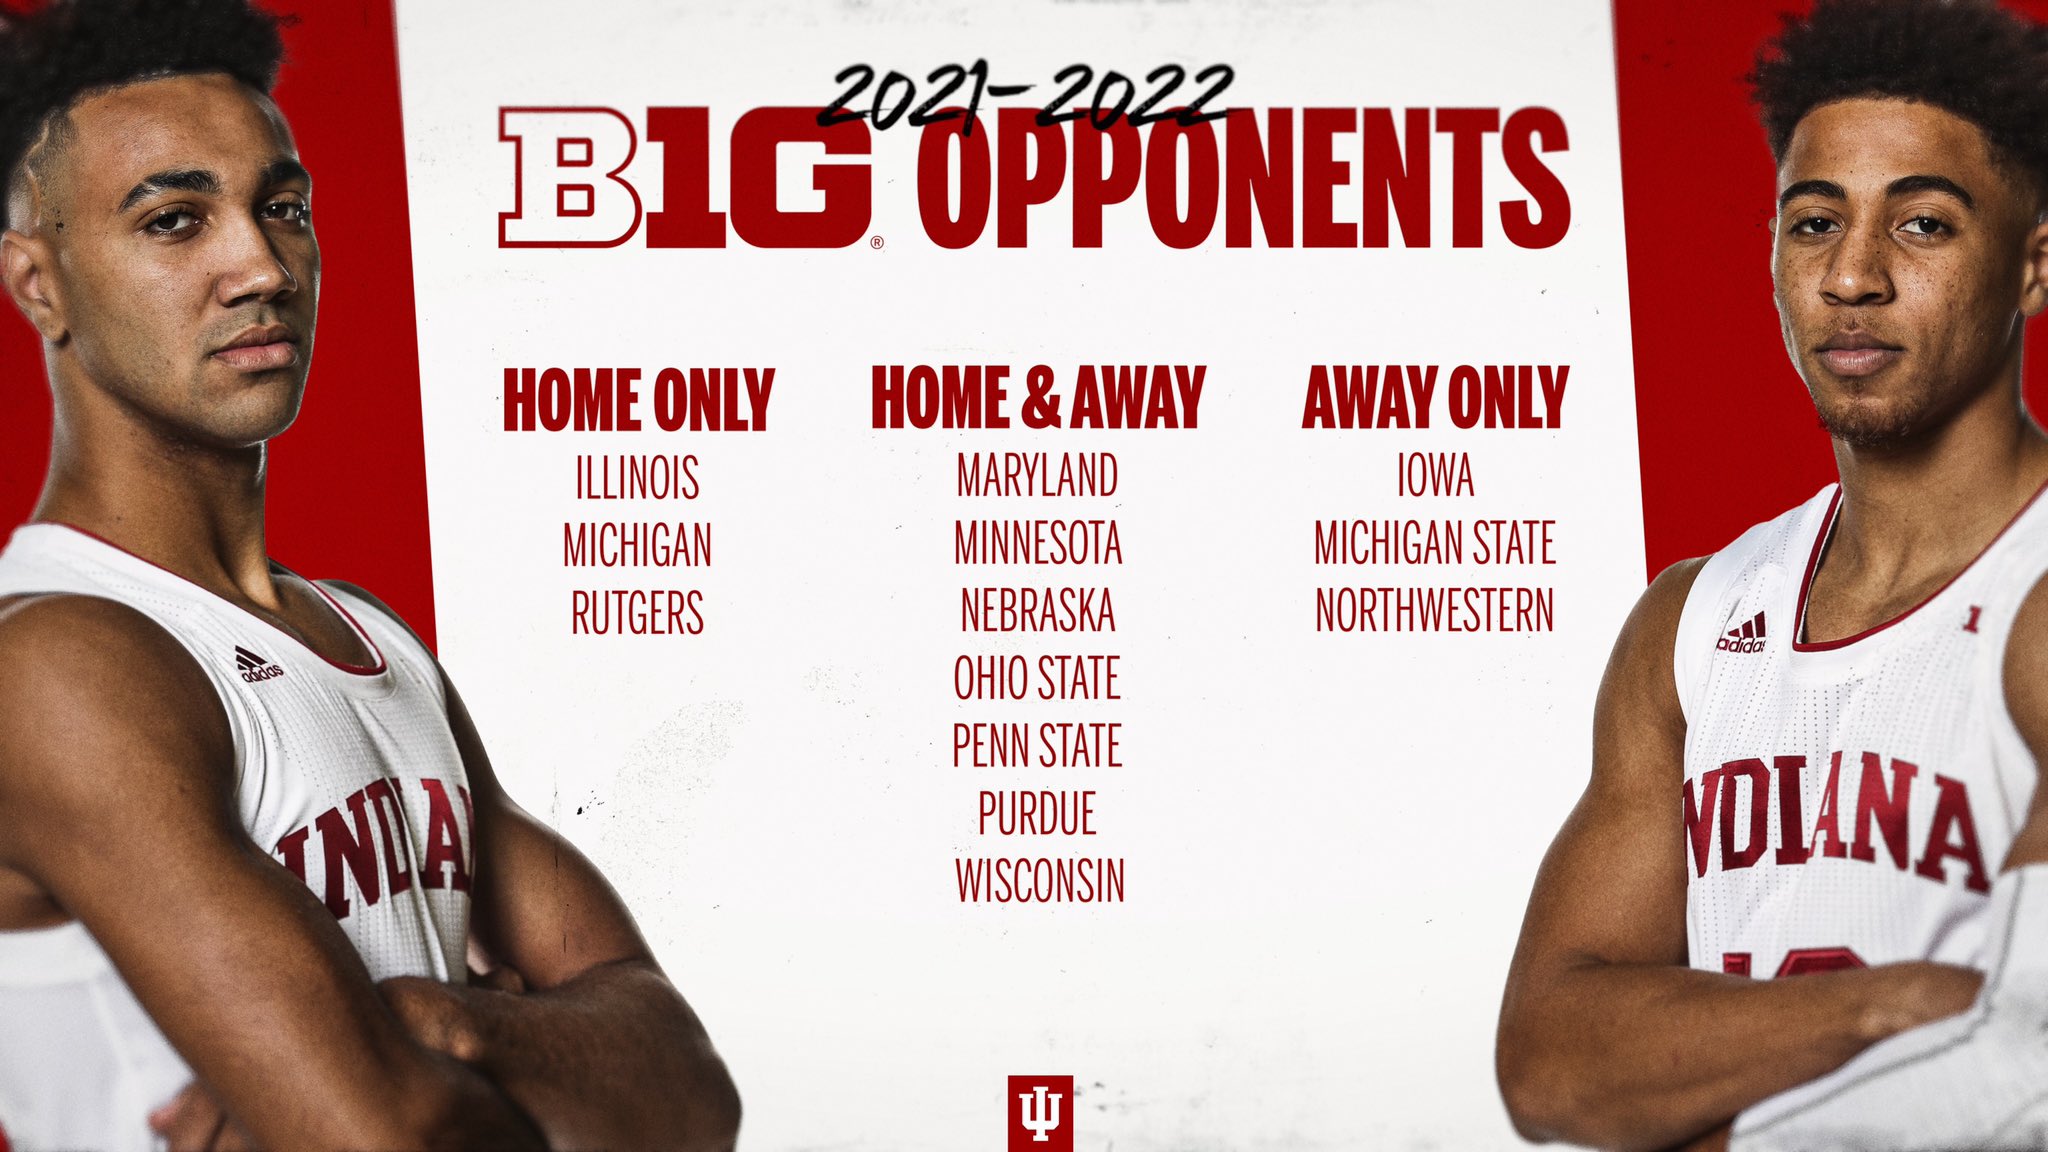 Iu Basketball Schedule 2022 Indiana Basketball On Twitter: "🚨 2021-2022 B1G Opponents ↴  Https://T.co/K85Bo5Vcd4" / Twitter